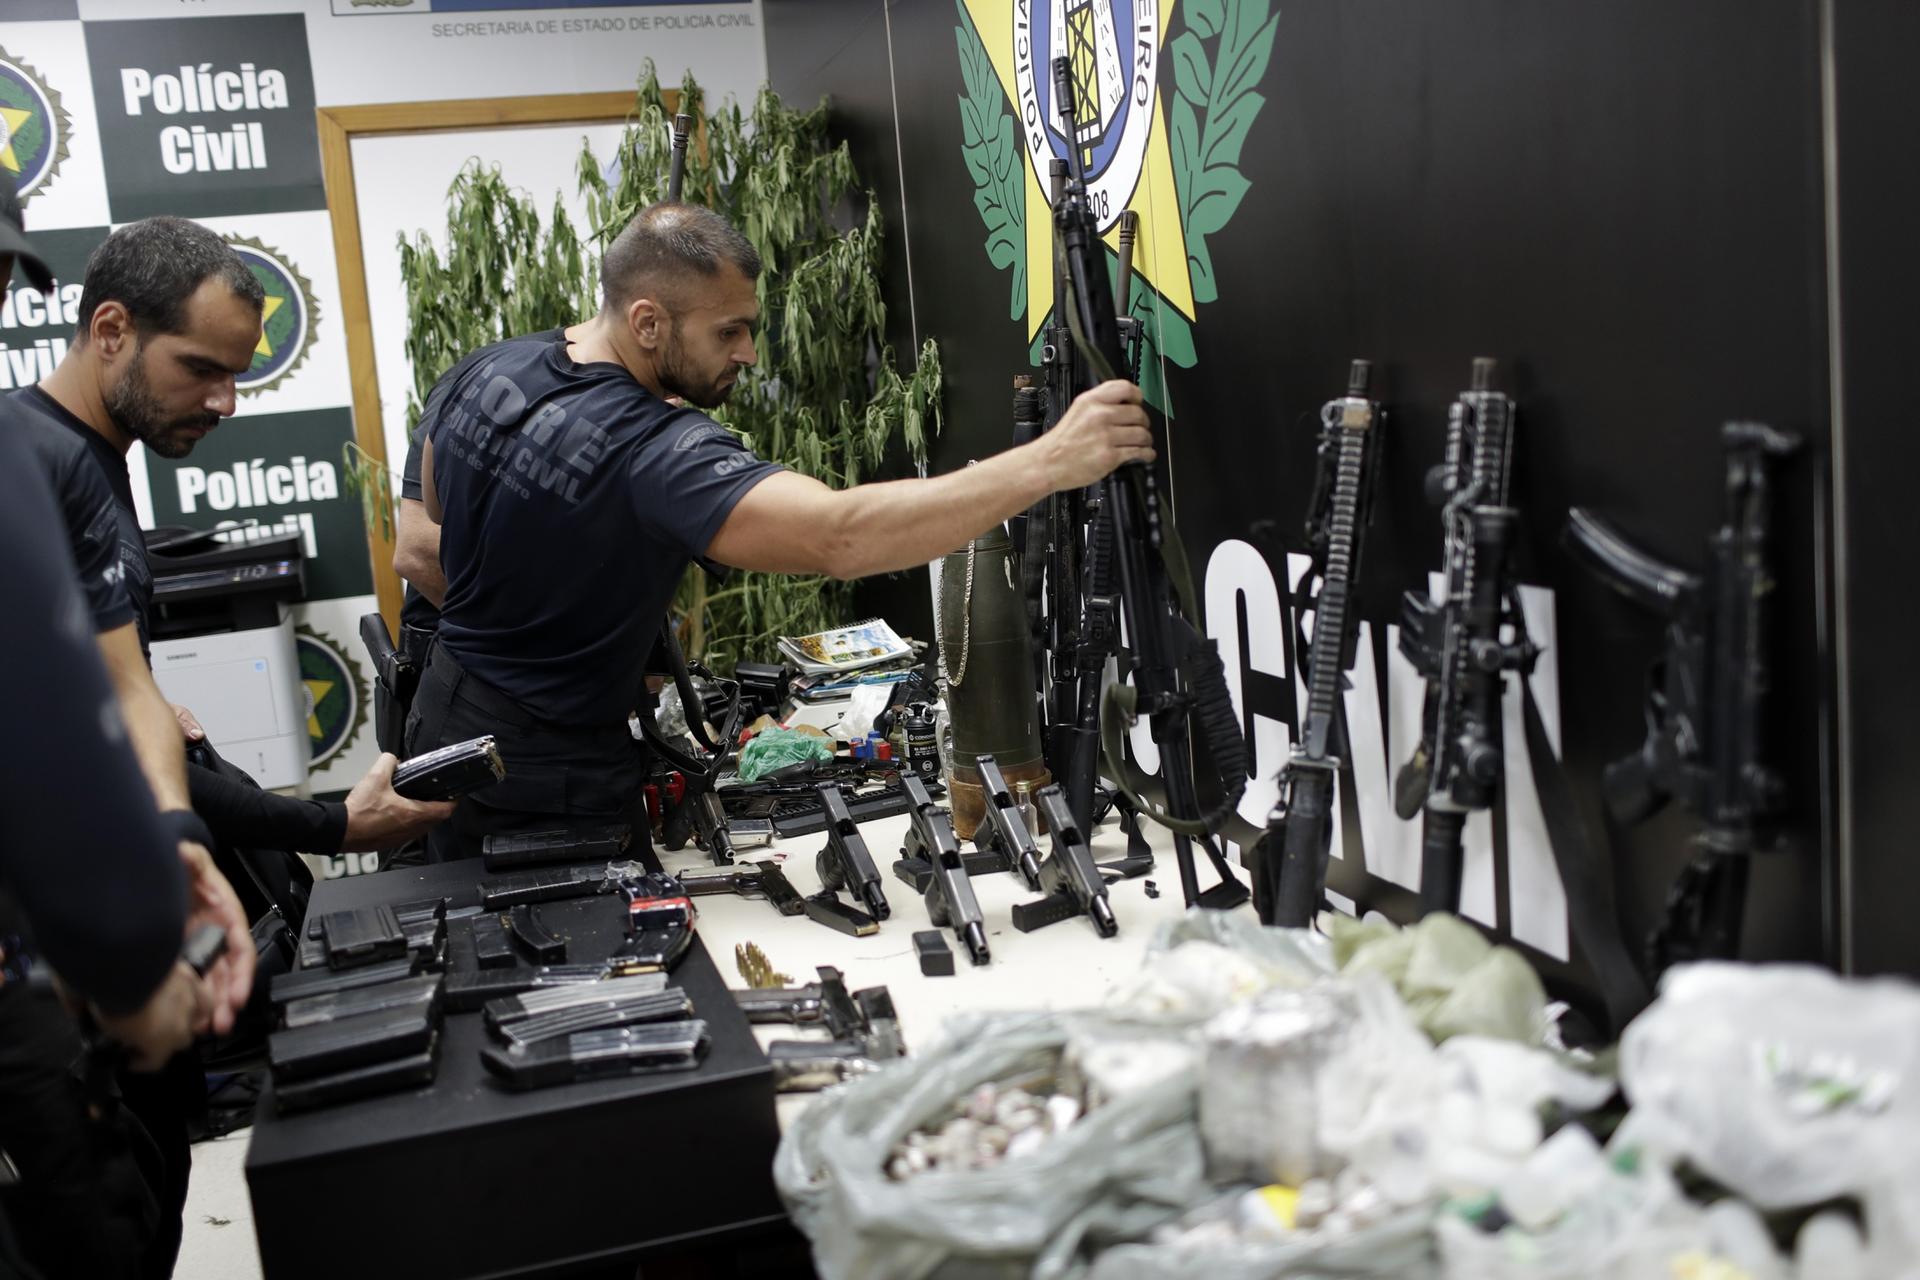 Weapons and drugs seized during a police raid are displayed for the press at city police headquarters in Rio de Janeiro, Brazil, May 6, 2021. 